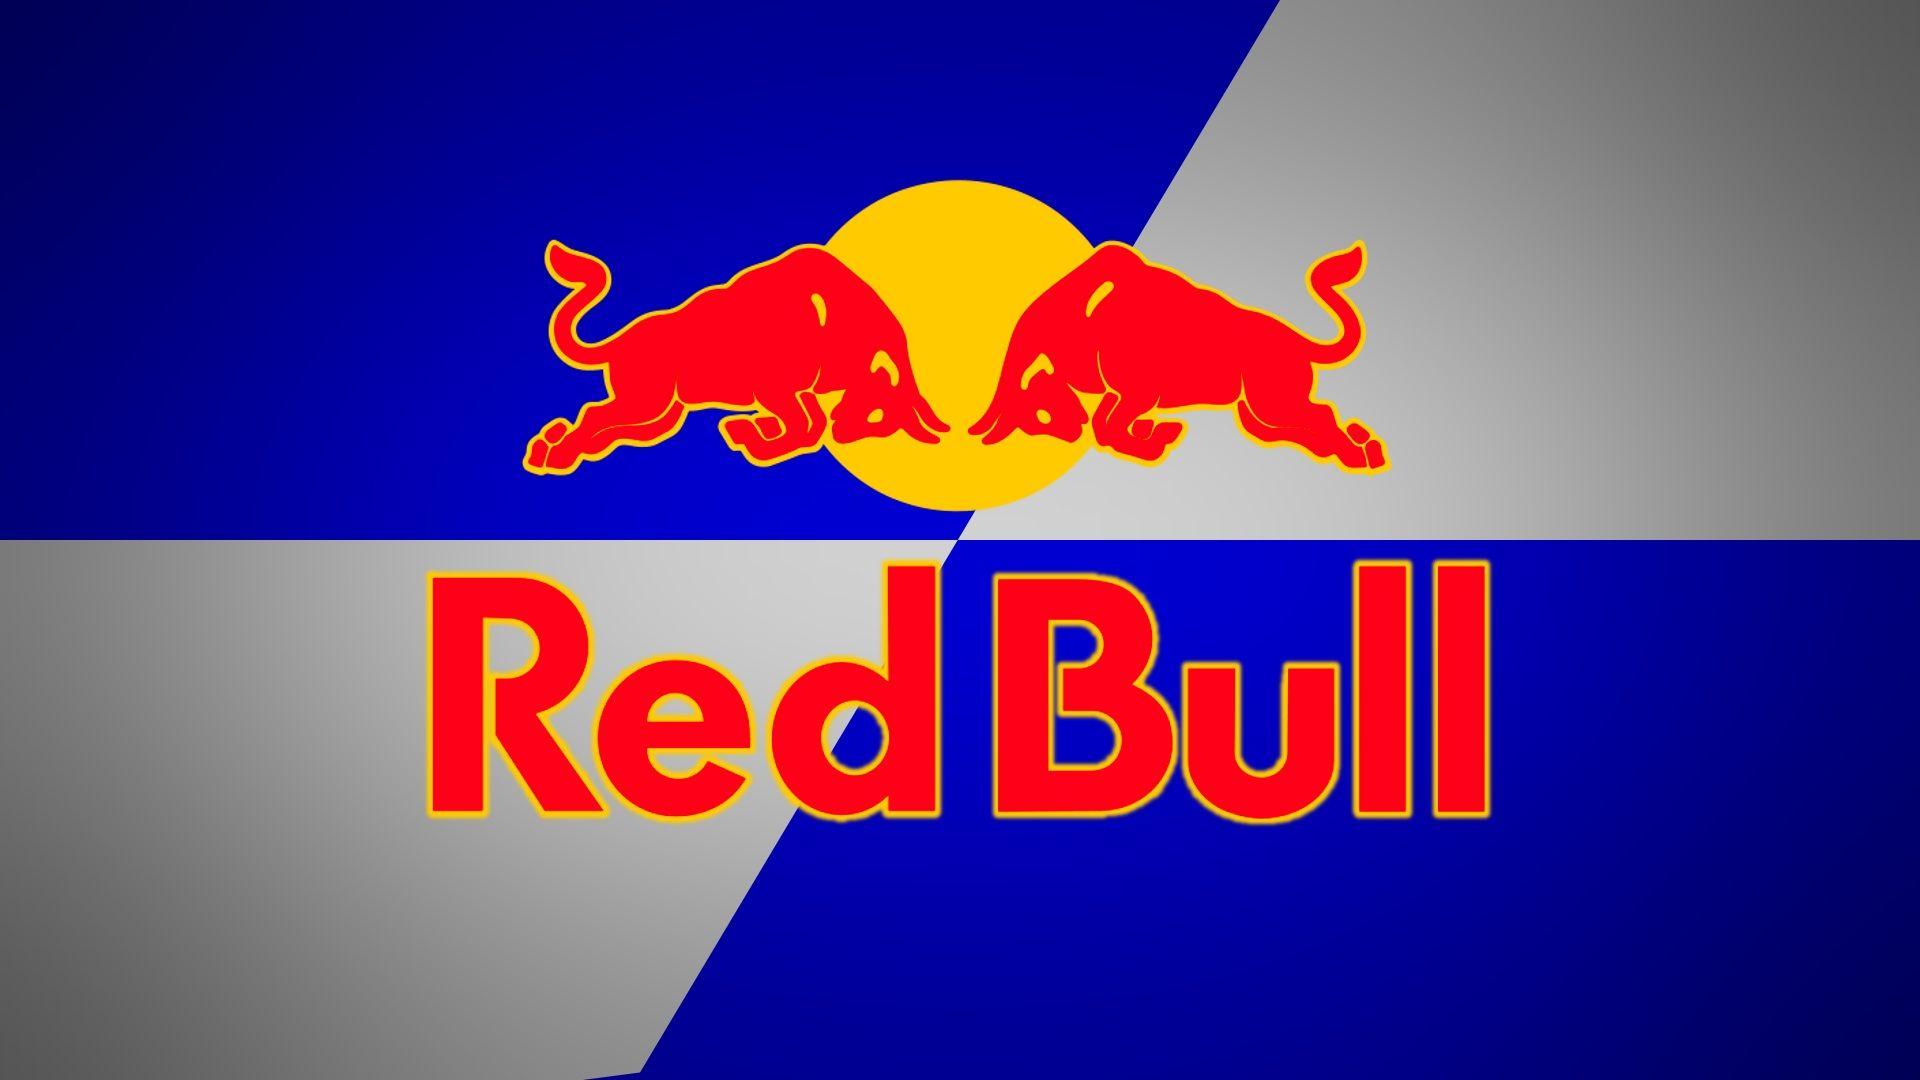 Famous Bull Logo - Why Red Bull Loves Its Haters Lee Yohn